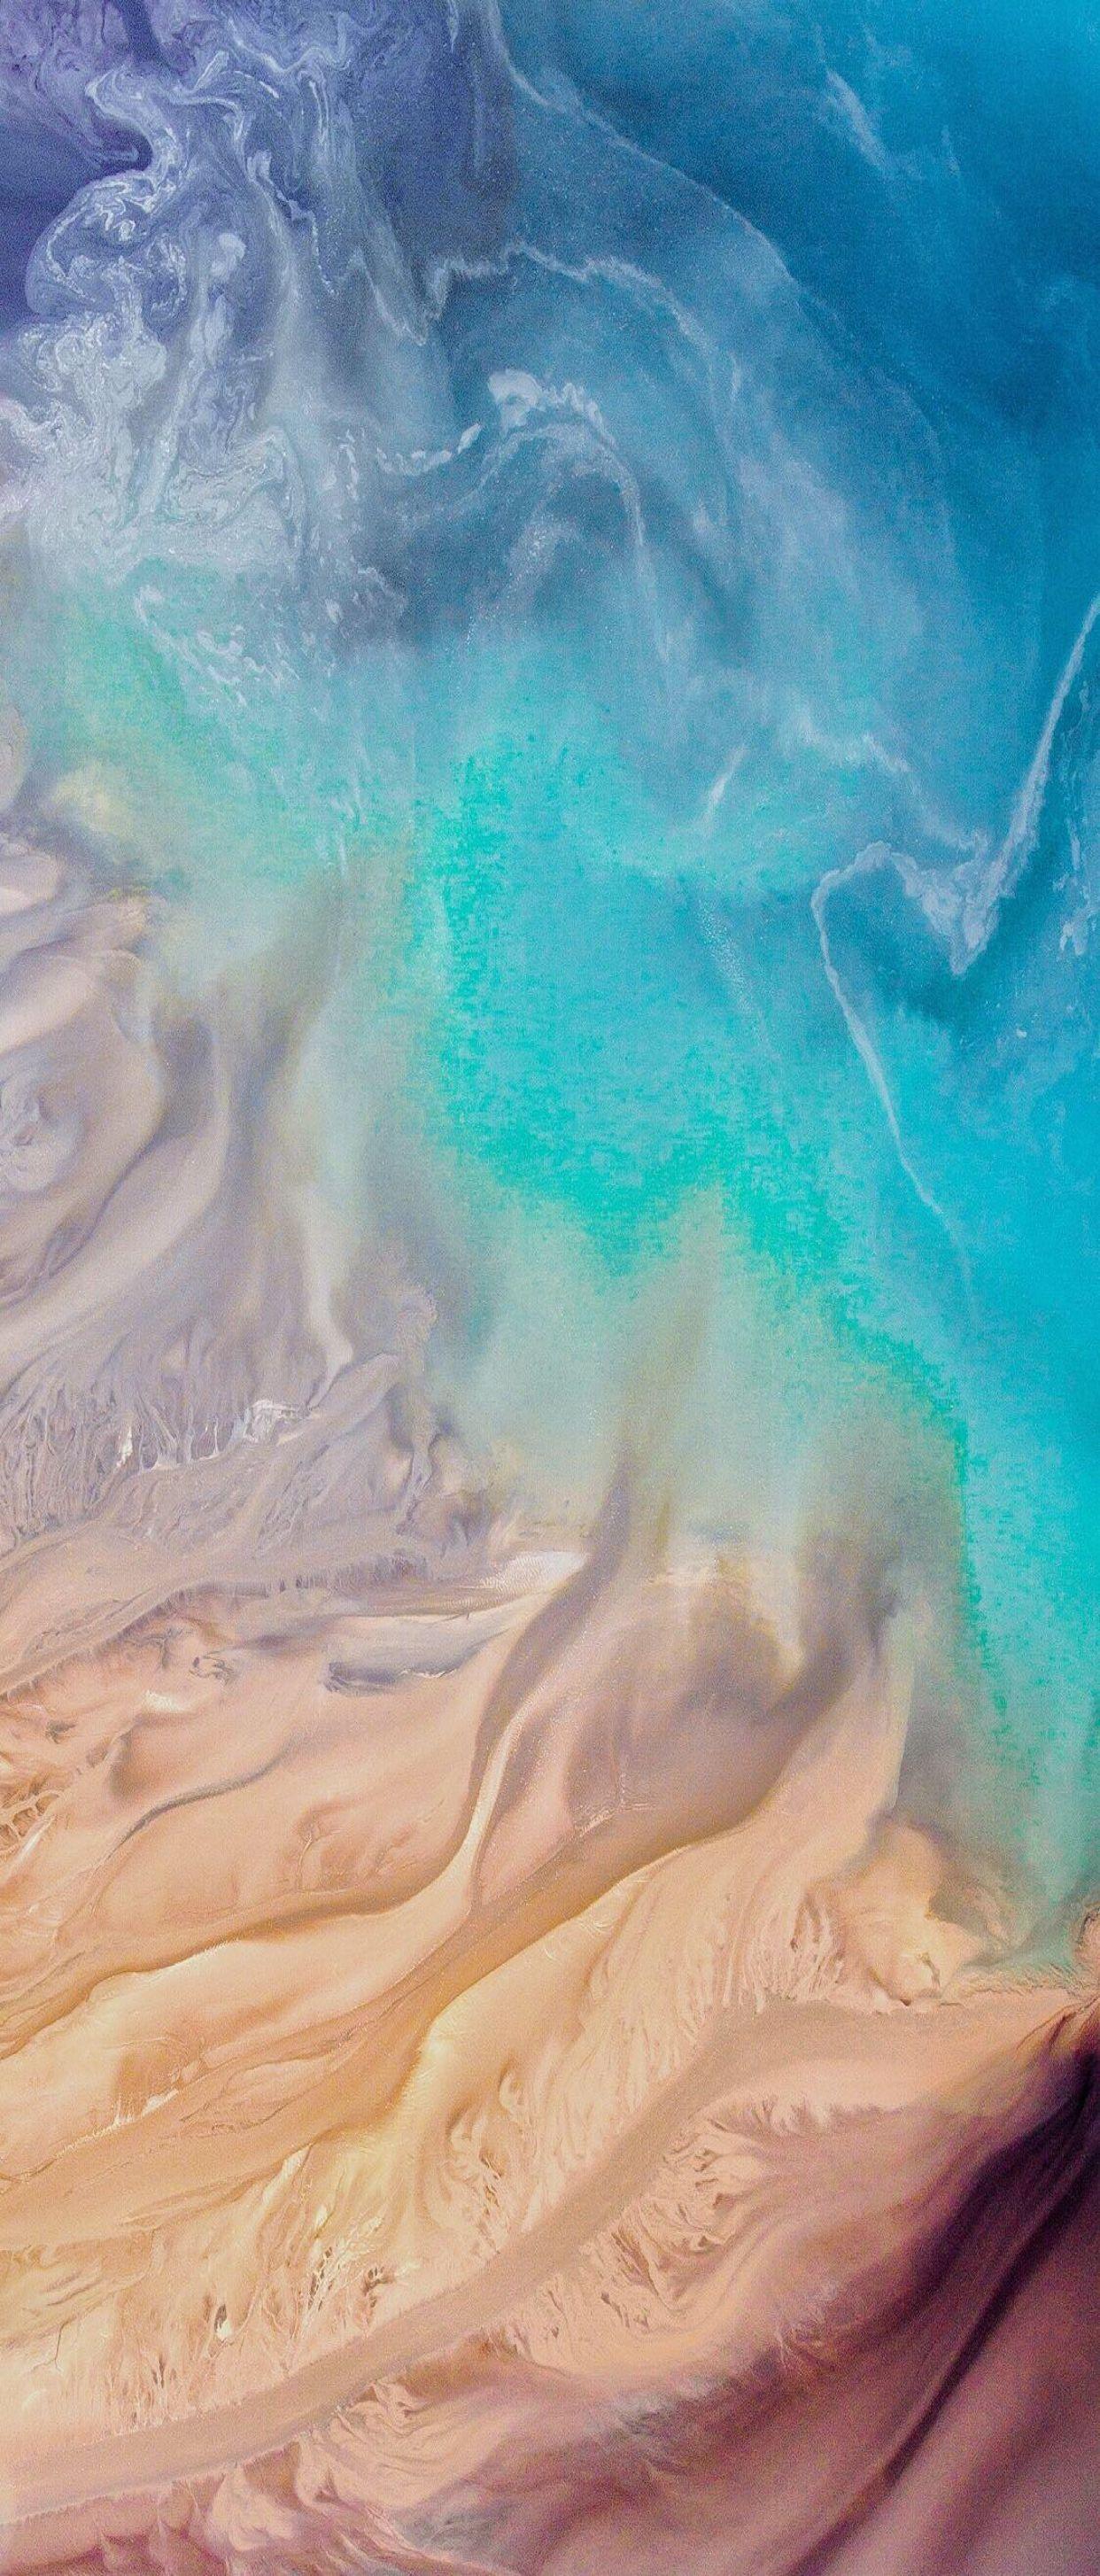 15 Best wallpaper aesthetic iphone 11 You Can Save It For Free